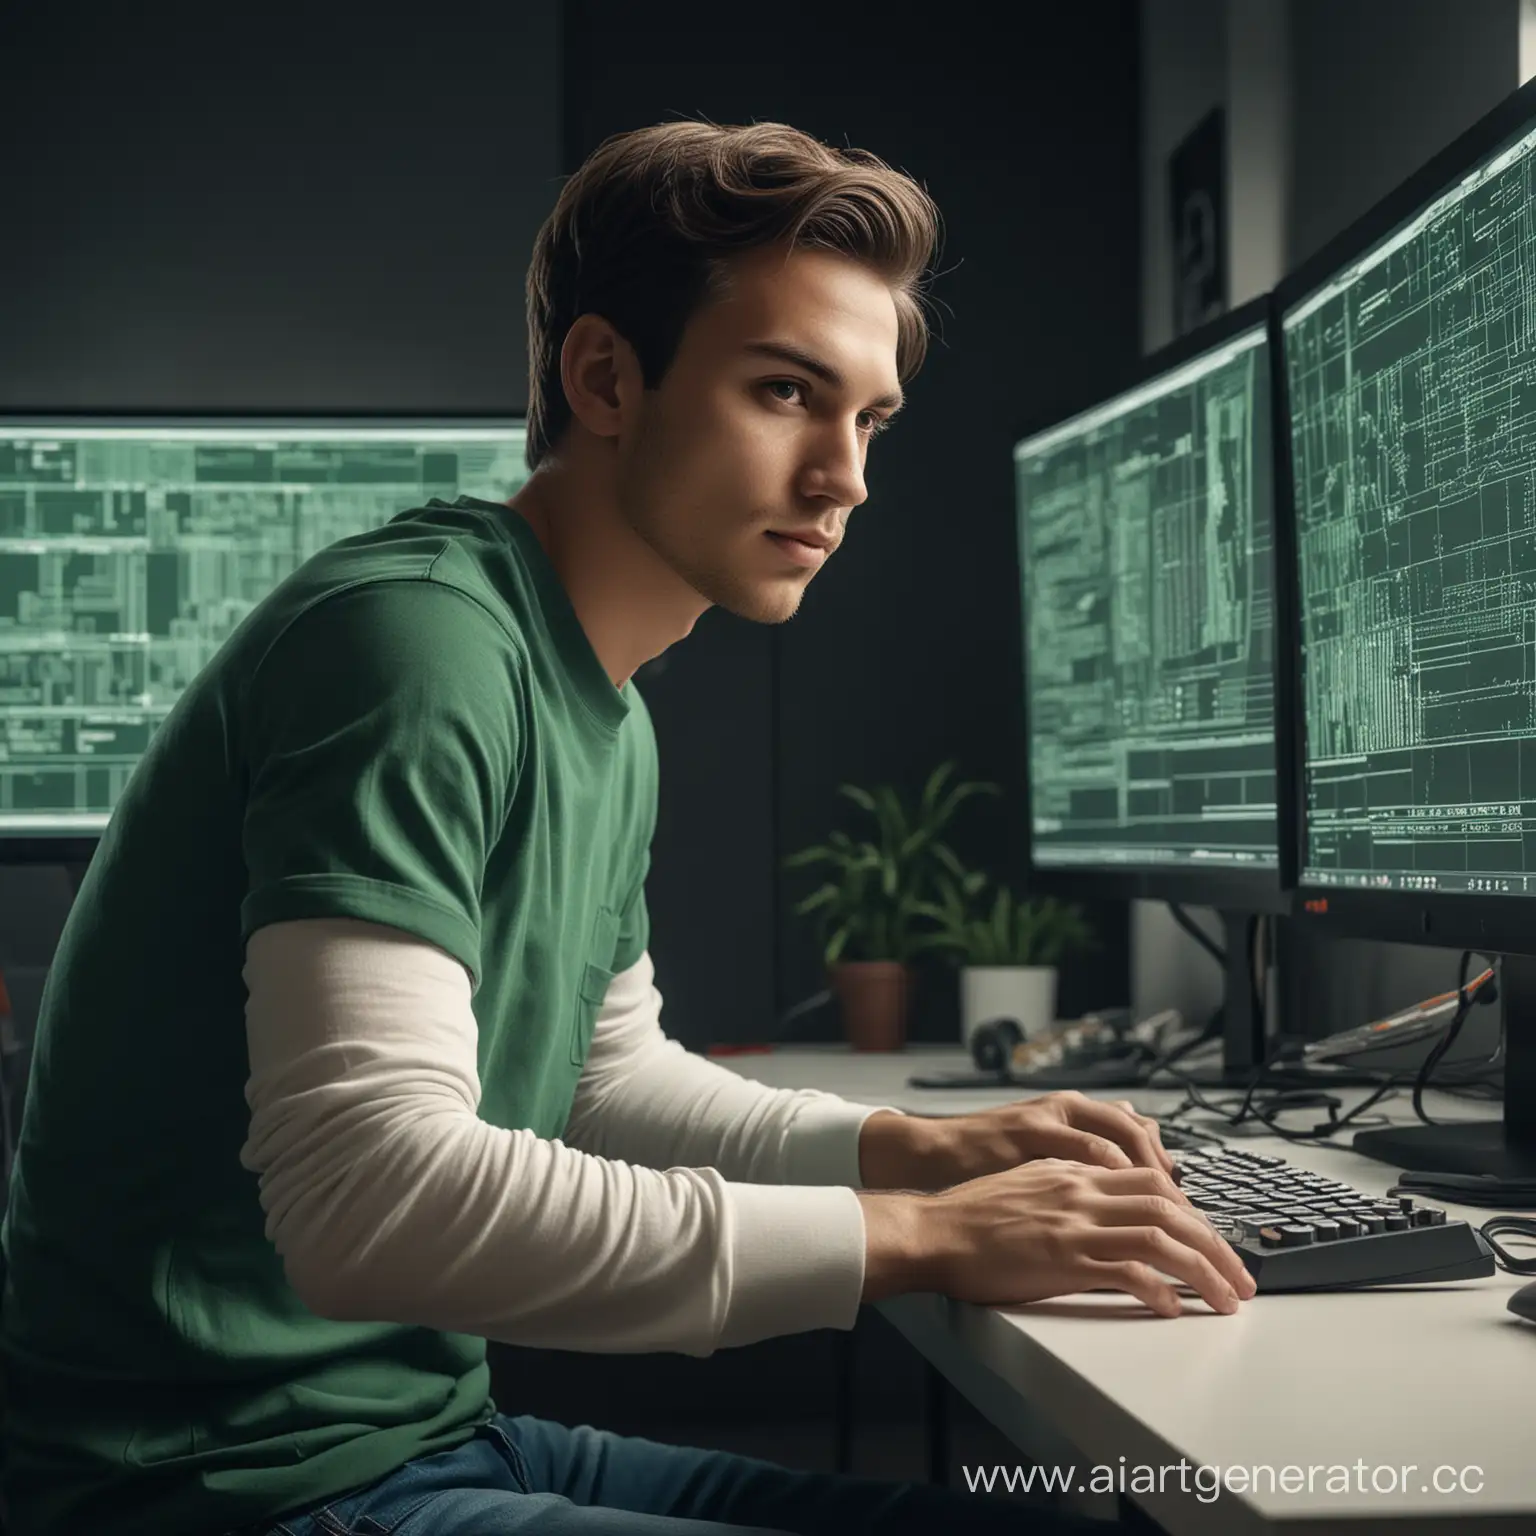 Stunning high resolution photo of a talented and handsome young ML engineer sitting in front of a huge monitor. He wears a simple T-shirt and jeans, displaying his casual yet professional demeanor. His hands are on the keyboard, he is completely immersed in the process of searching for information. Lines of program code are displayed on the monitor. The color palette is characterized by a predominance of black, green and white. The overall atmosphere is a mixture of creativity, focus and passion for knowledge, photography, cinematography and 3D rendering, cinematic, photography, 3D rendering.